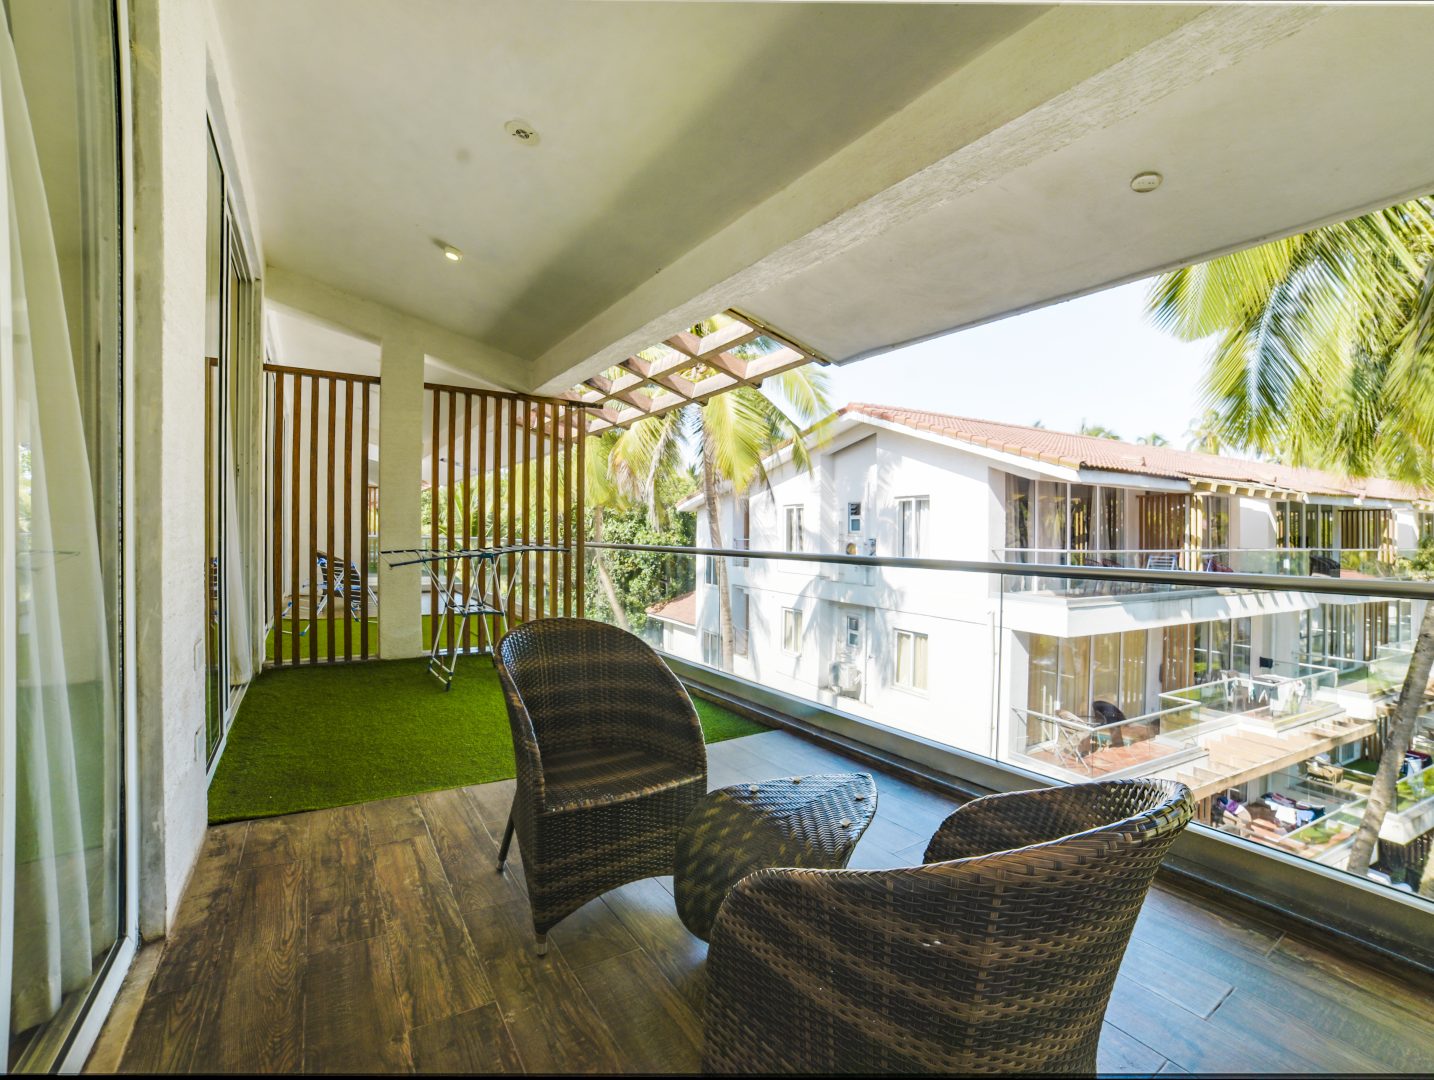 2 bhk apartment in goa for stay